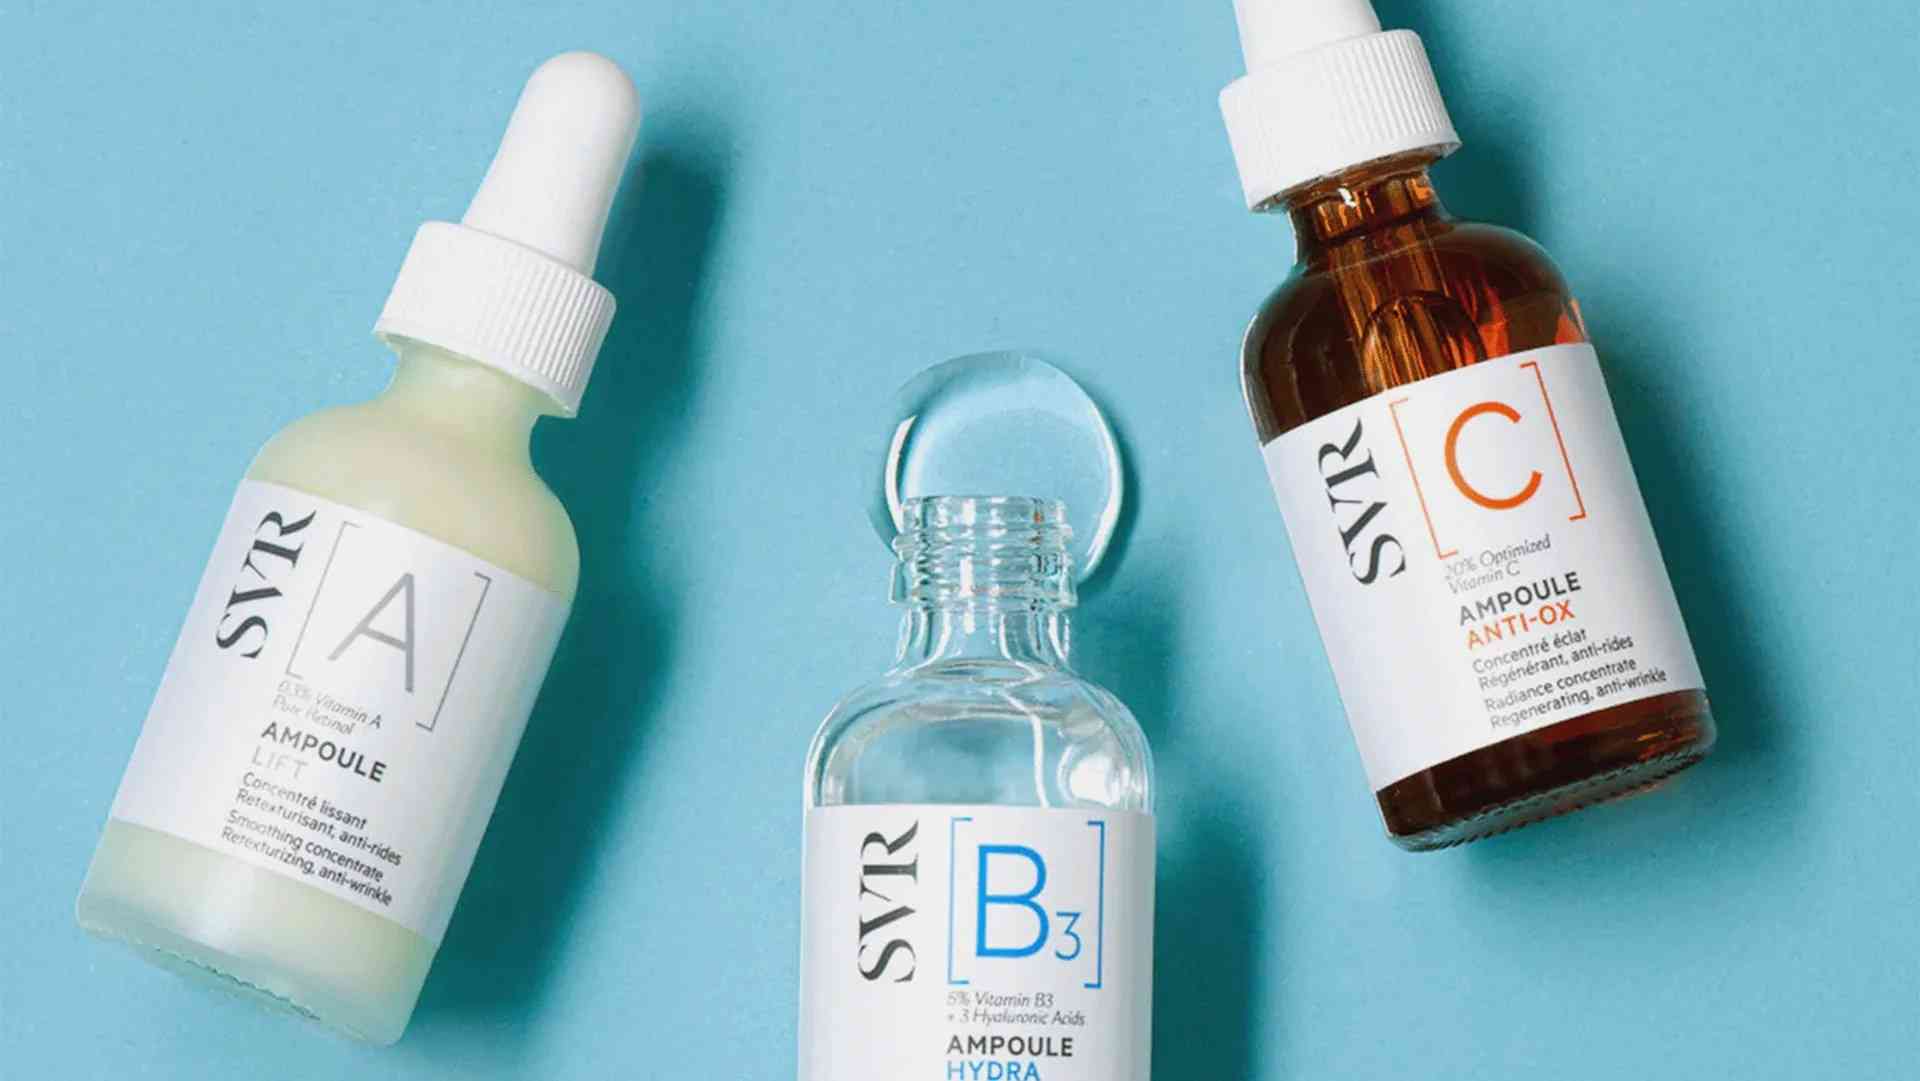 Decoding the A, B, Cs of skincare - French Beauty Co.